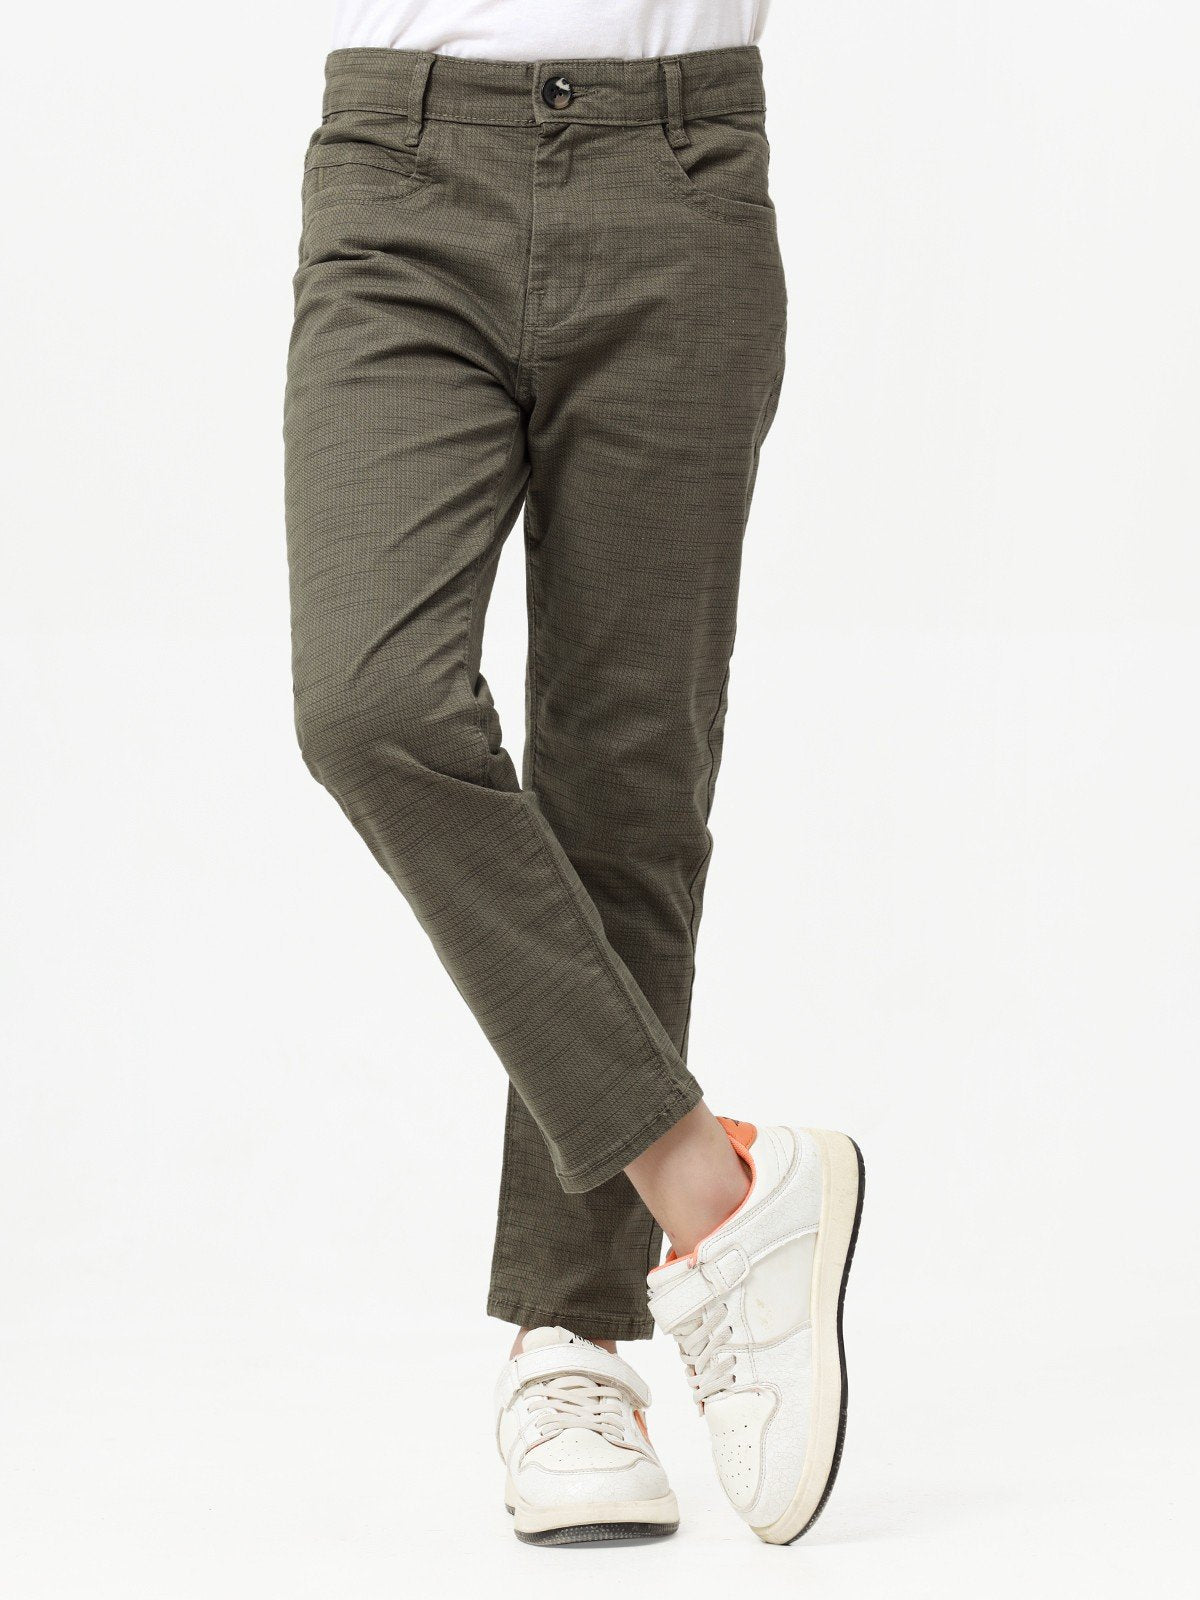 Boy's Olive Chino Pant - EBBCP23-027